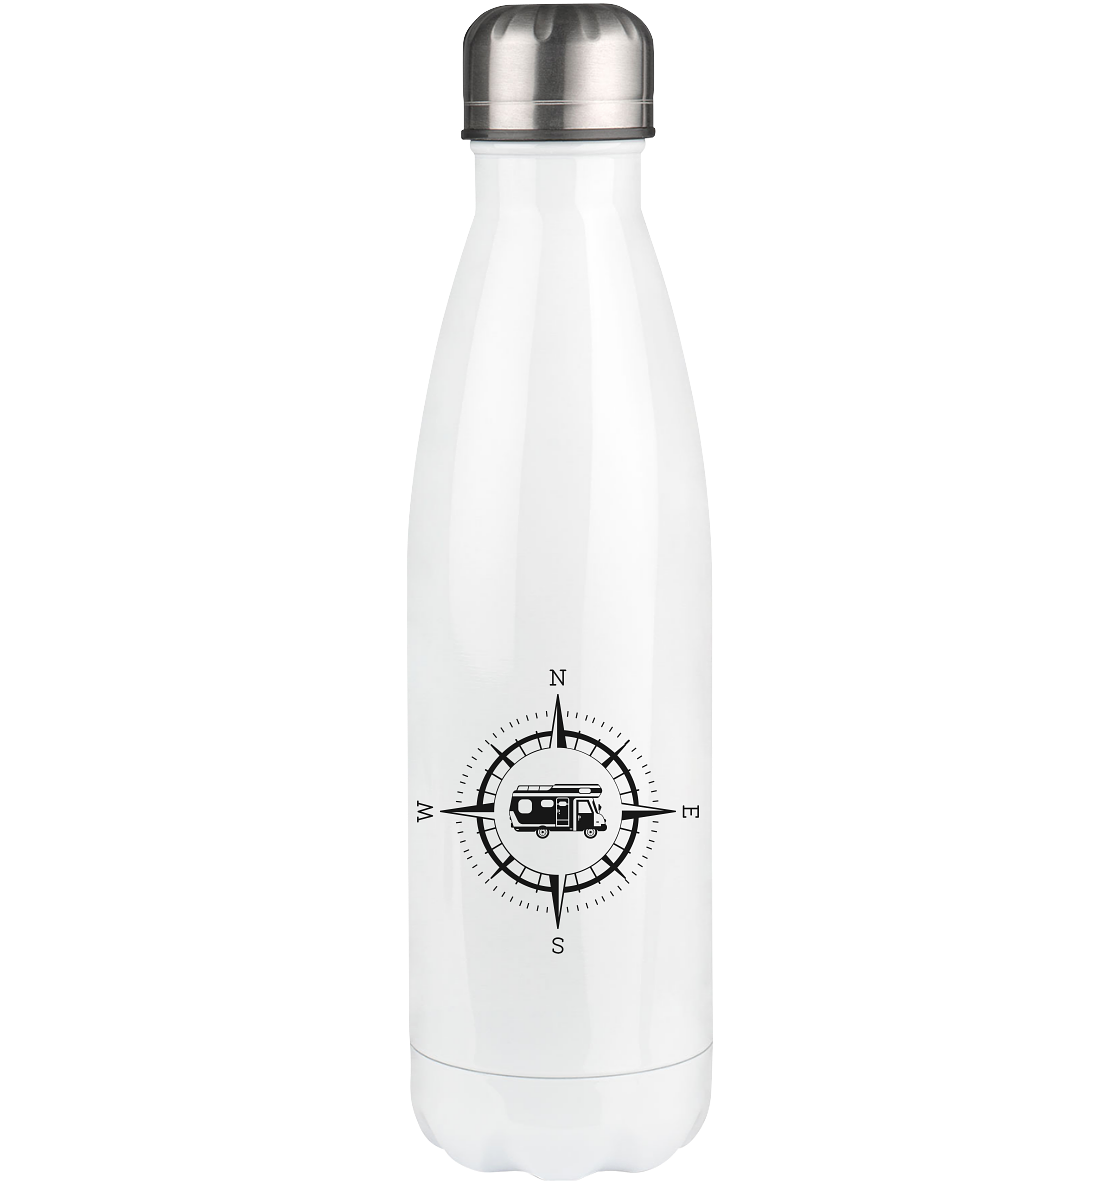 Compass and Camping - Edelstahl Thermosflasche camping 500ml